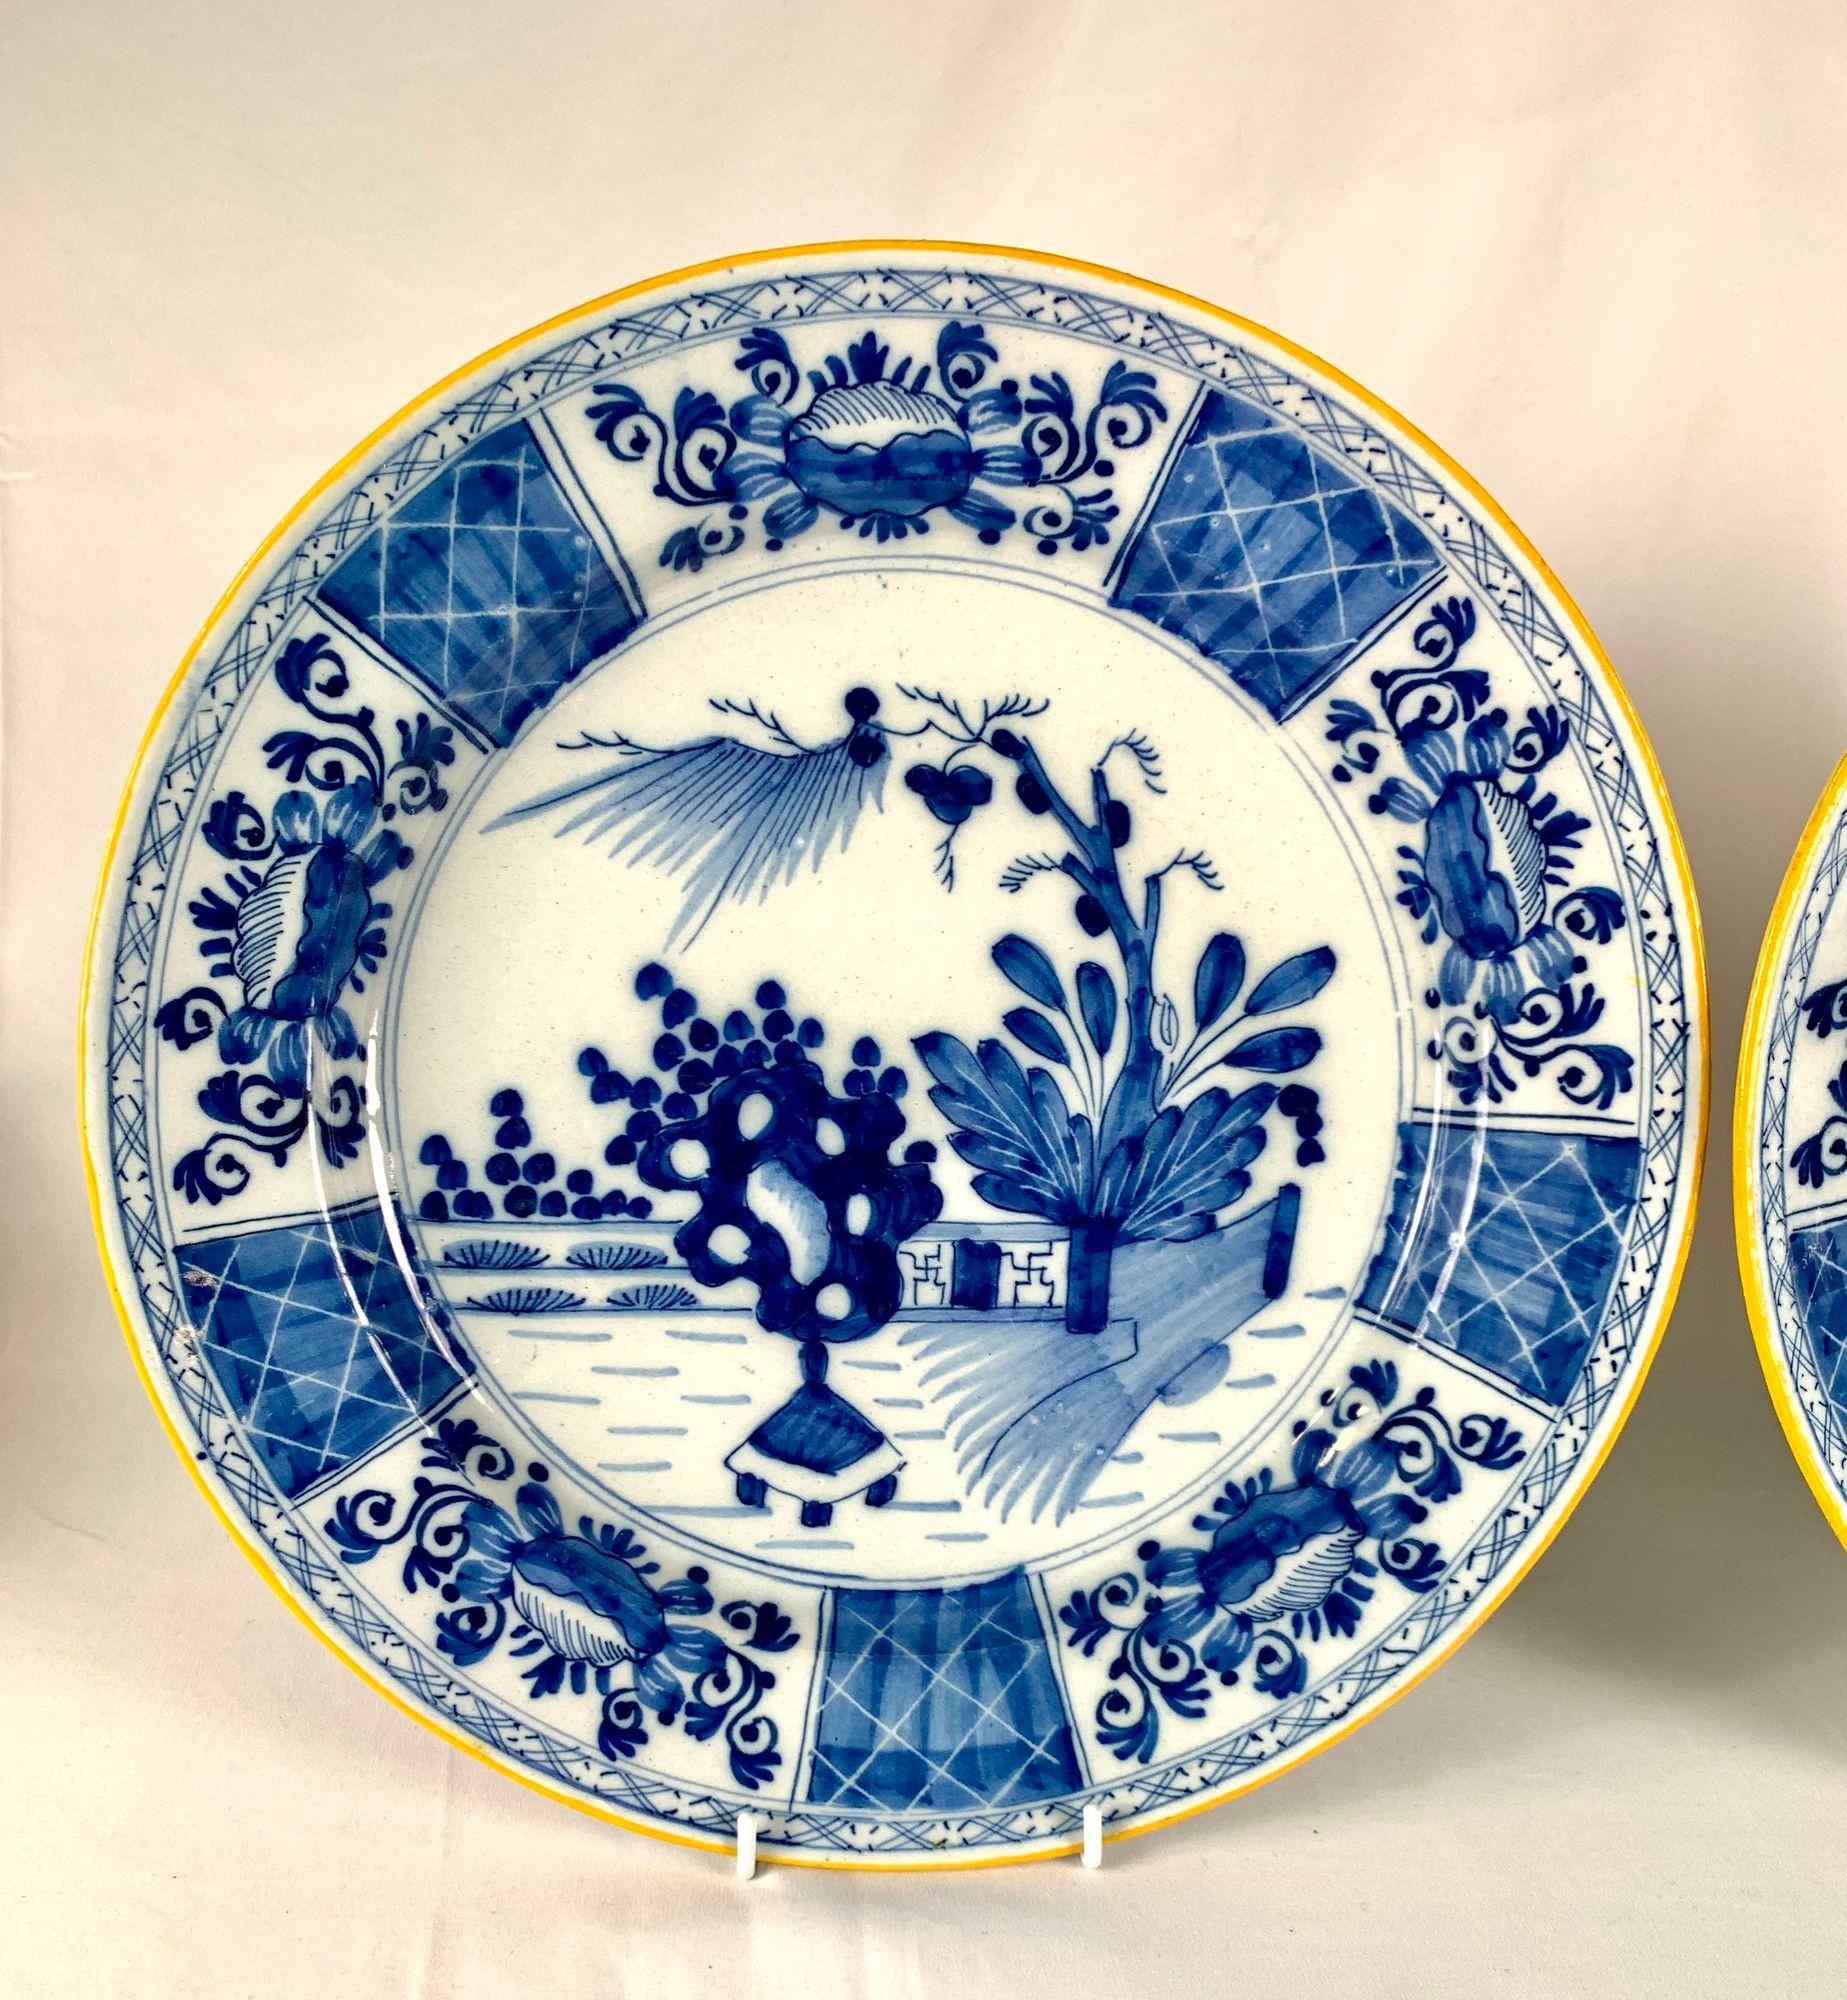 This lovely pair of Delft chargers were hand-painted at 